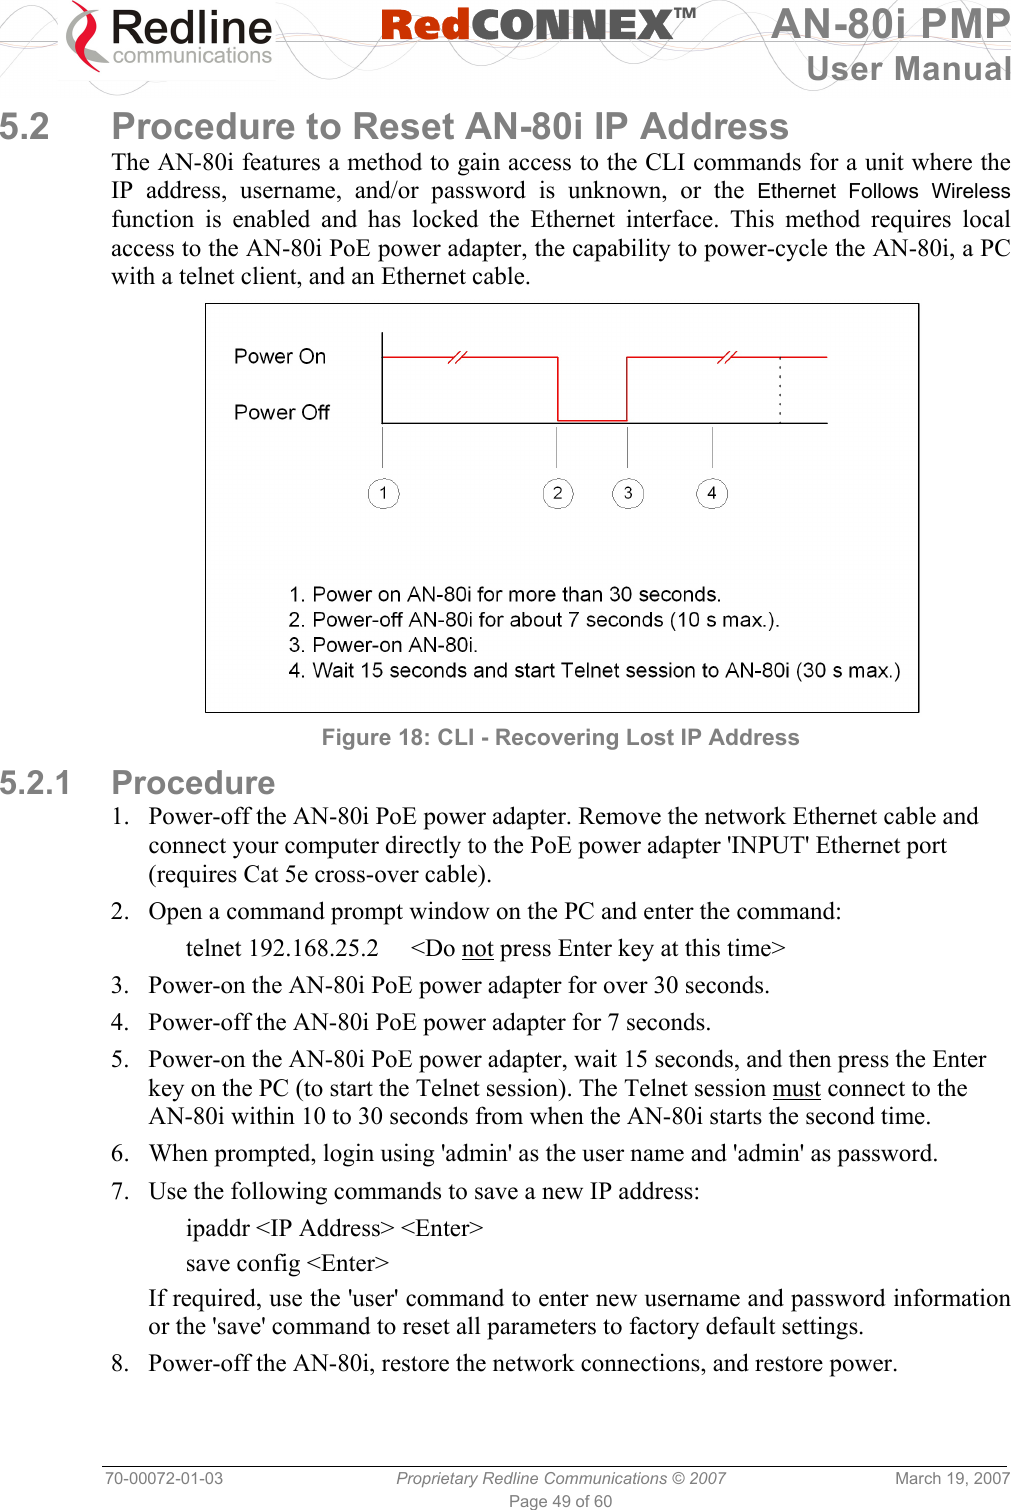   RedCONNEXTM AN-80i PMP User Manual 70-00072-01-03  Proprietary Redline Communications © 2007  March 19, 2007 Page 49 of 60  5.2  Procedure to Reset AN-80i IP Address The AN-80i features a method to gain access to the CLI commands for a unit where the IP address, username, and/or password is unknown, or the Ethernet Follows Wireless function is enabled and has locked the Ethernet interface. This method requires local access to the AN-80i PoE power adapter, the capability to power-cycle the AN-80i, a PC with a telnet client, and an Ethernet cable.   Figure 18: CLI - Recovering Lost IP Address 5.2.1 Procedure 1.  Power-off the AN-80i PoE power adapter. Remove the network Ethernet cable and connect your computer directly to the PoE power adapter &apos;INPUT&apos; Ethernet port (requires Cat 5e cross-over cable). 2.  Open a command prompt window on the PC and enter the command:   telnet 192.168.25.2  &lt;Do not press Enter key at this time&gt; 3.  Power-on the AN-80i PoE power adapter for over 30 seconds. 4.  Power-off the AN-80i PoE power adapter for 7 seconds. 5.  Power-on the AN-80i PoE power adapter, wait 15 seconds, and then press the Enter key on the PC (to start the Telnet session). The Telnet session must connect to the AN-80i within 10 to 30 seconds from when the AN-80i starts the second time. 6.  When prompted, login using &apos;admin&apos; as the user name and &apos;admin&apos; as password. 7.  Use the following commands to save a new IP address:   ipaddr &lt;IP Address&gt; &lt;Enter&gt;  save config &lt;Enter&gt; If required, use the &apos;user&apos; command to enter new username and password information or the &apos;save&apos; command to reset all parameters to factory default settings. 8.  Power-off the AN-80i, restore the network connections, and restore power. 